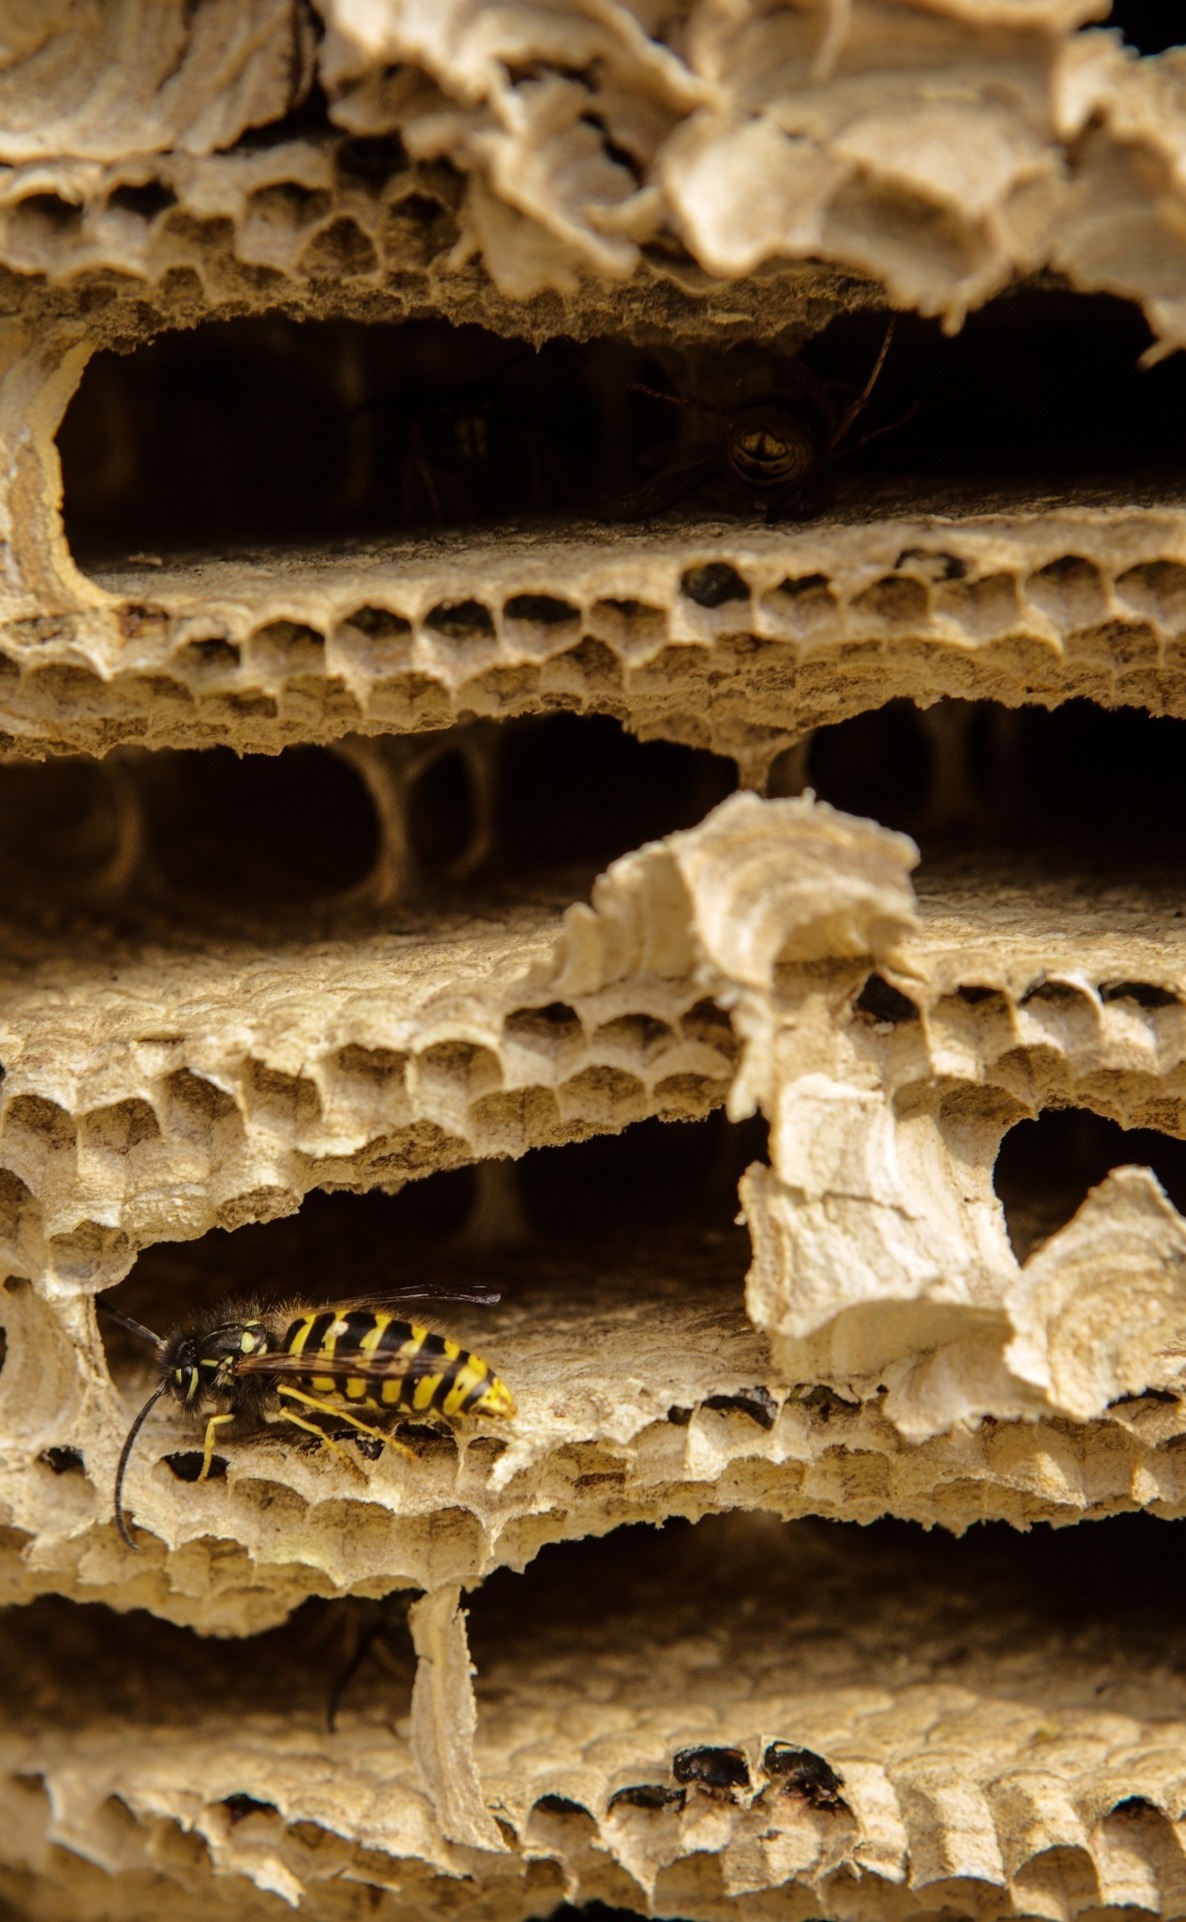 the inside of a wasp nest